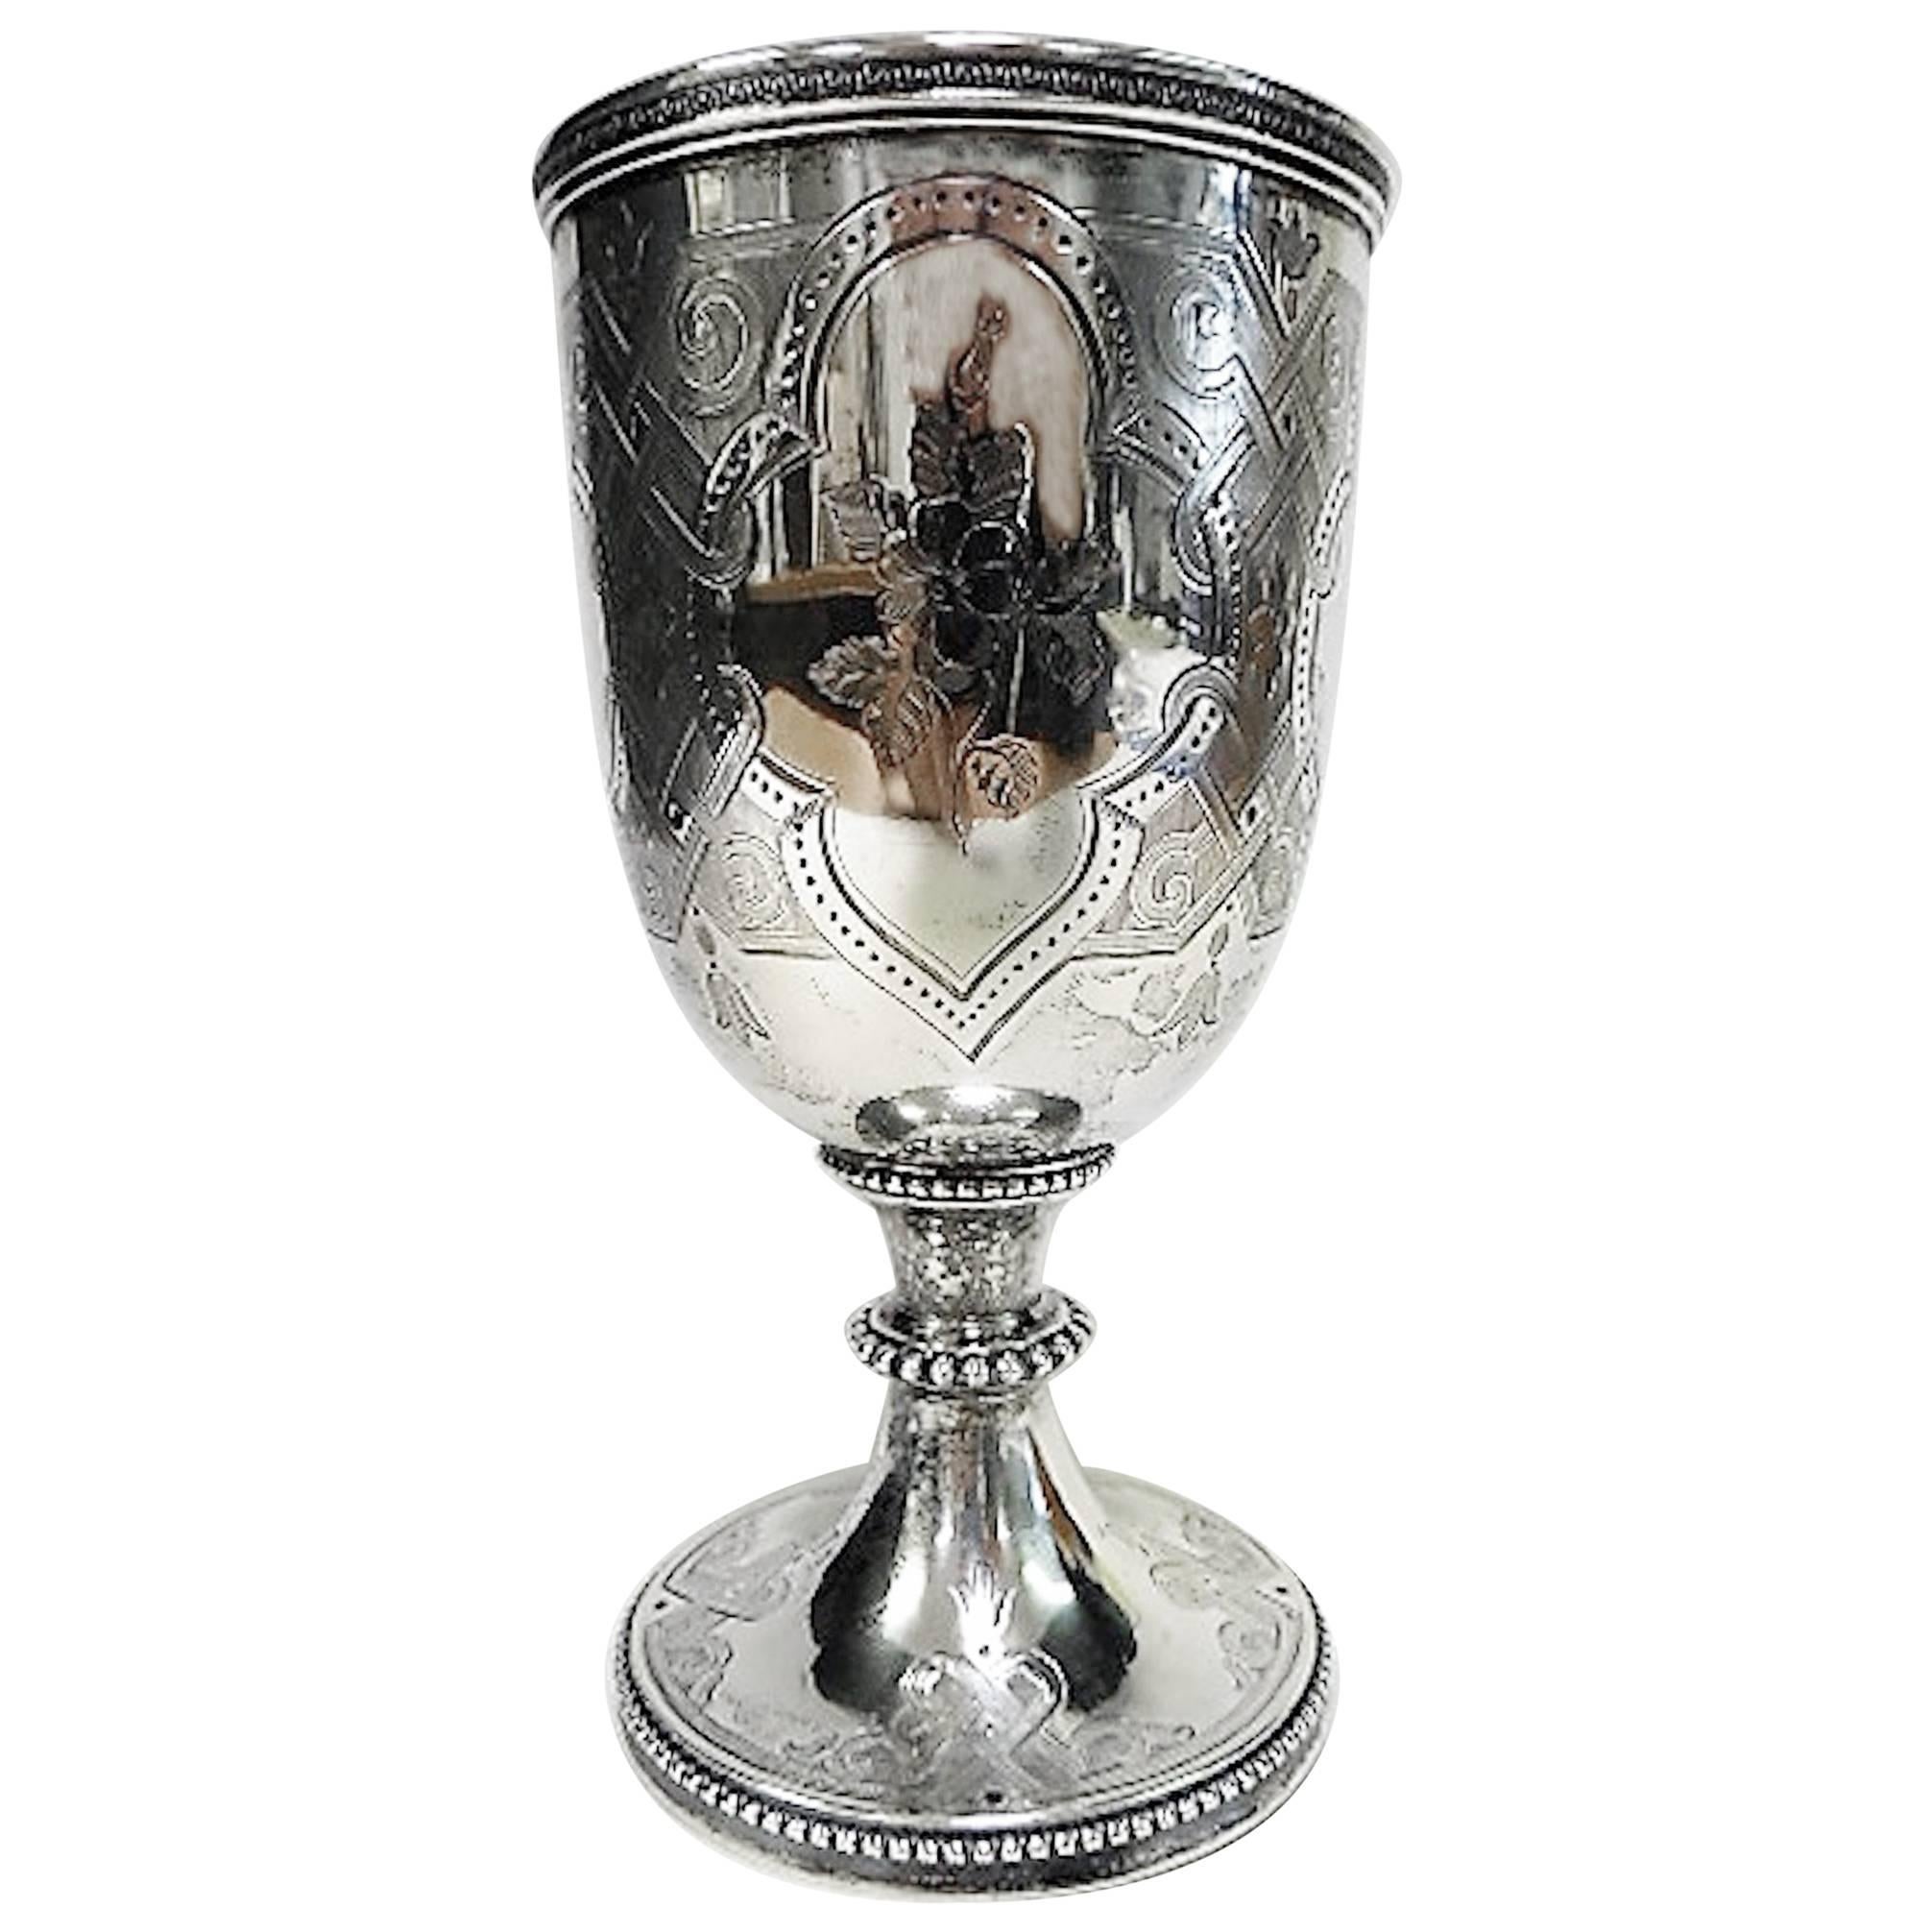 George Angell, London, 1859 Sterling Goblet